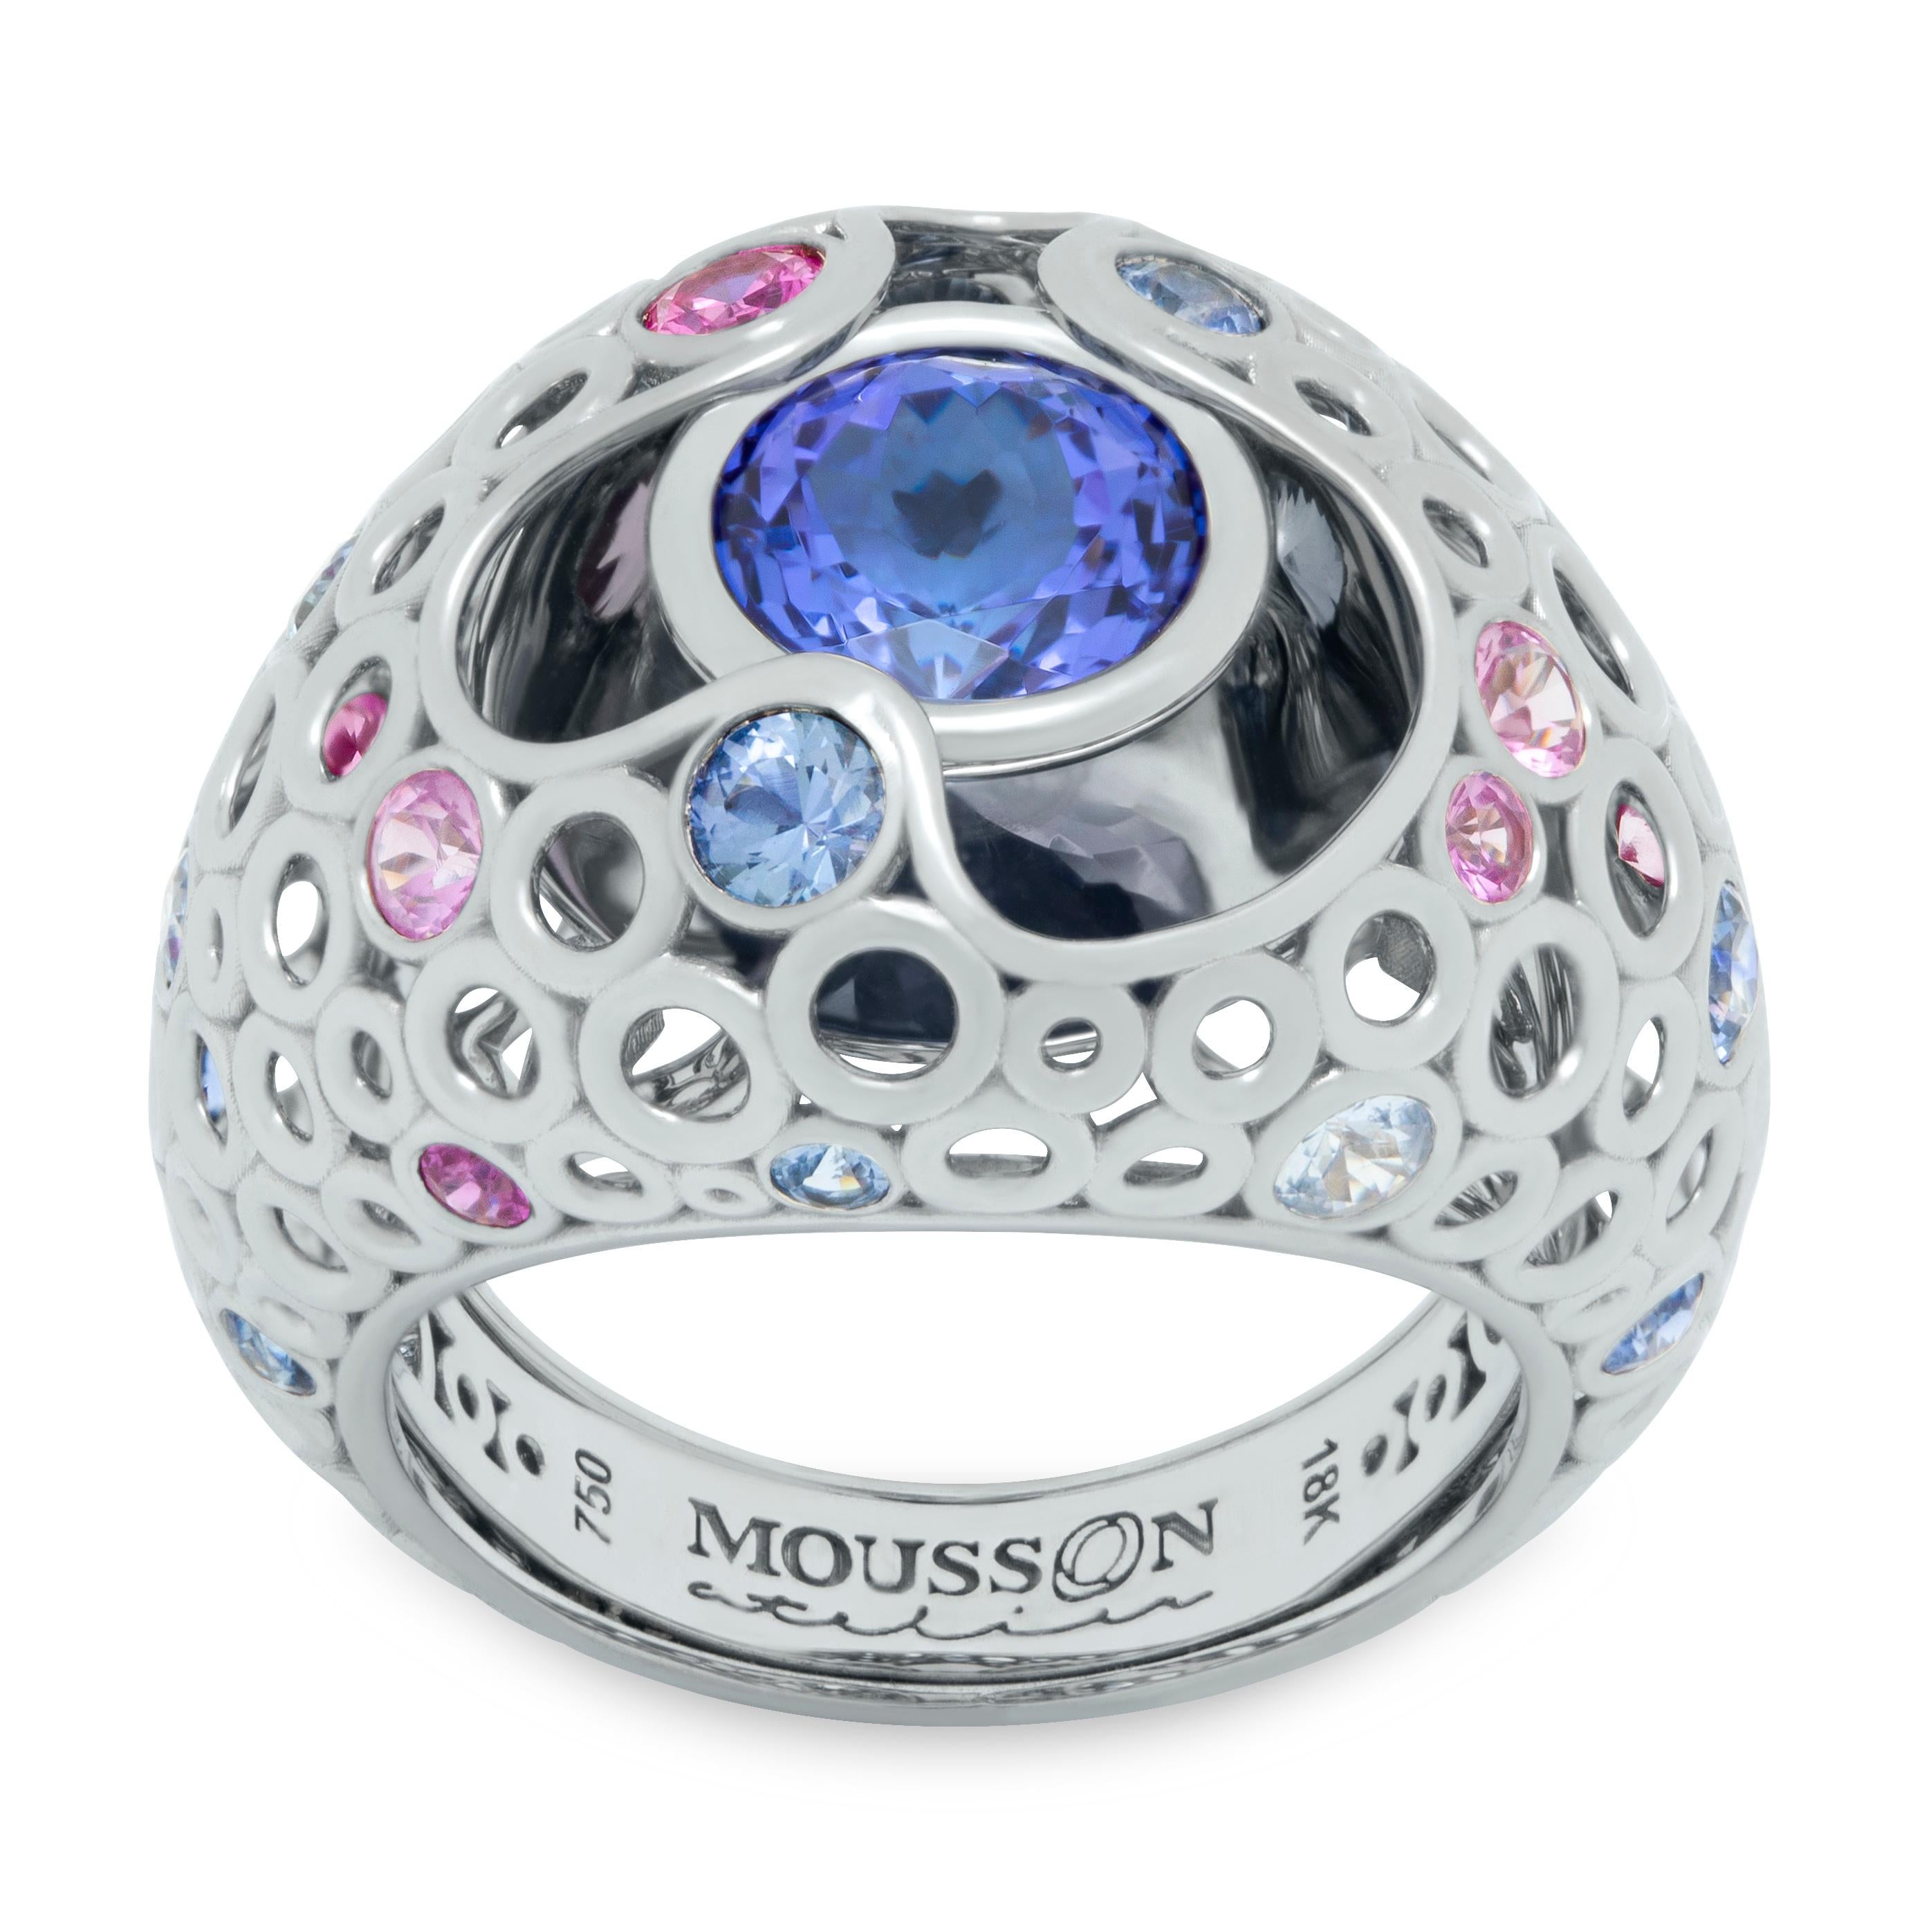 Tanzanite 2.29 Carat Pink Blue Sapphires 18 Karat White Gold Bubble Ring
Incredibly light and airy Ring from our Bubbles Collection. White 18 Karat Gold is made in the form of variety of small bubbles, some of which have 8 and 14 Pink and Blue